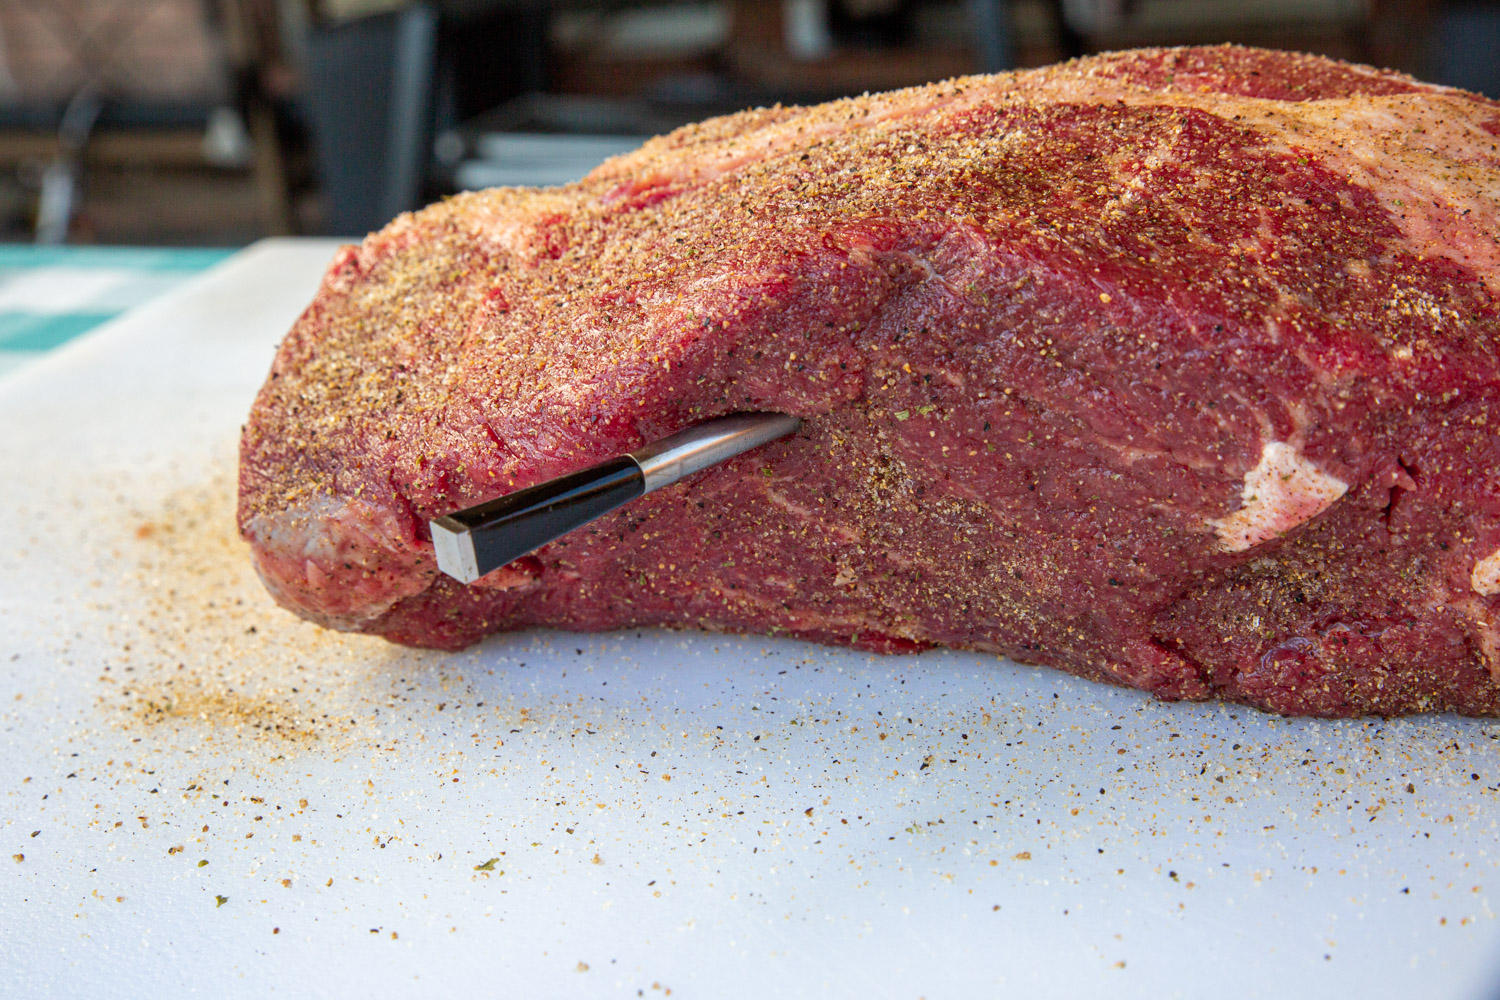 Raw chuck roast with thermometer probe inserted into the thickest part.